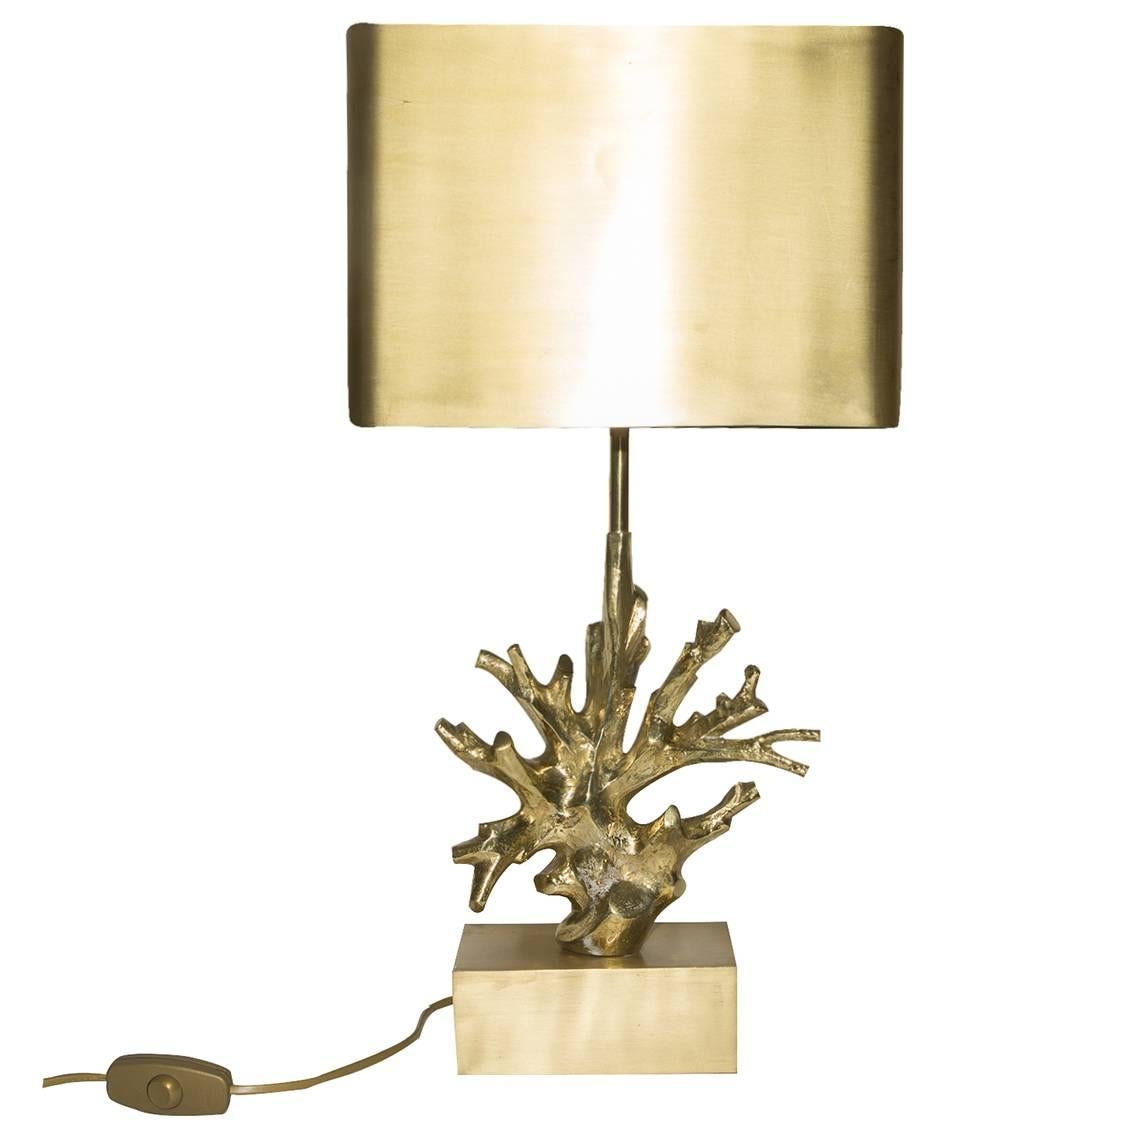 Gilded Bronze coral shape lamp, Maison Charles Paris, 1960s, Made in France